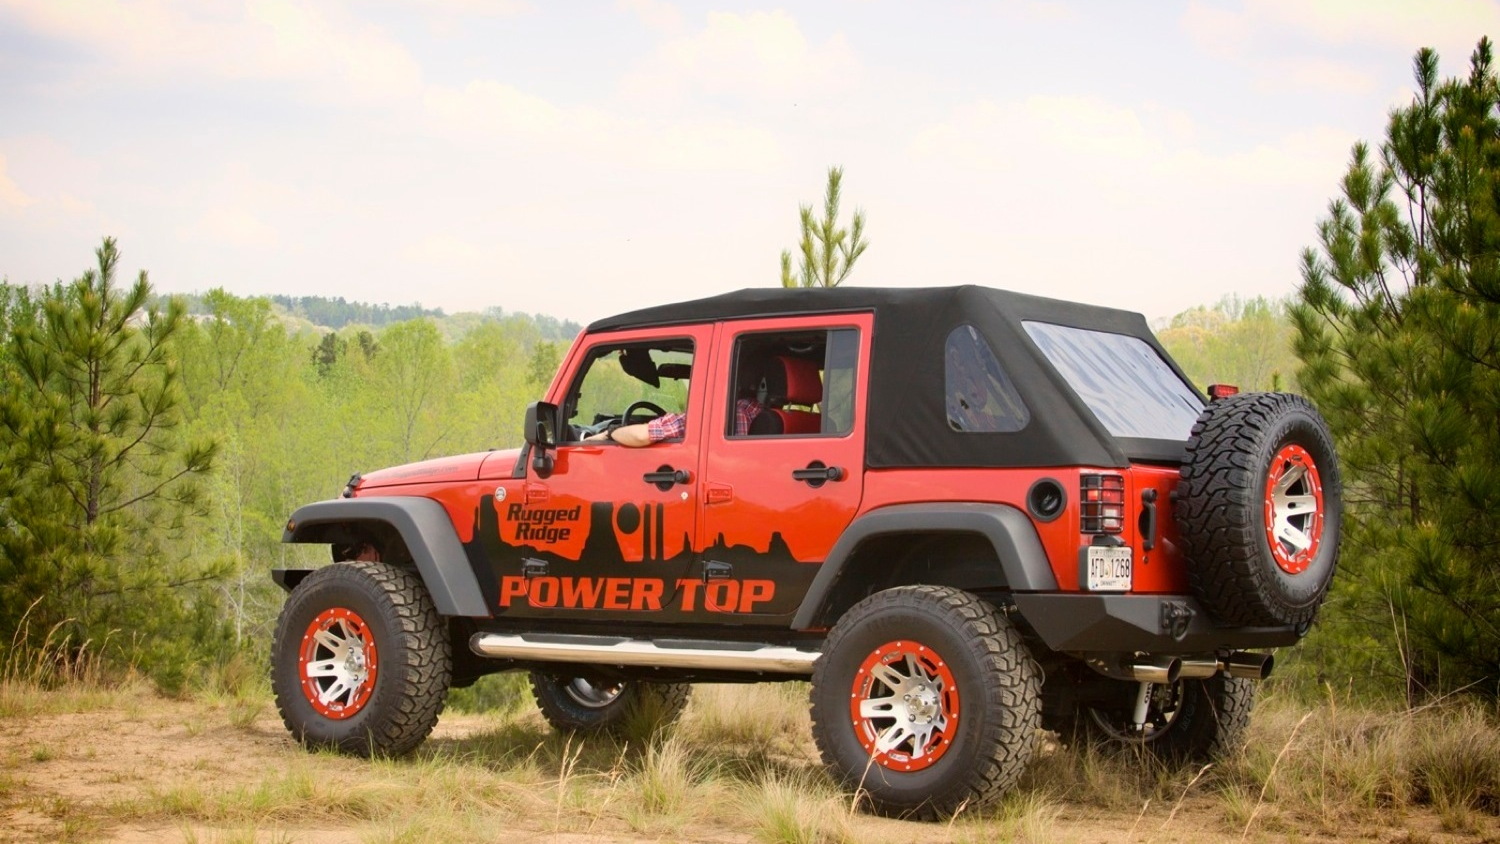 The Rugged Ridge PowerTop, for Jeep Wrangler Unlimited models.